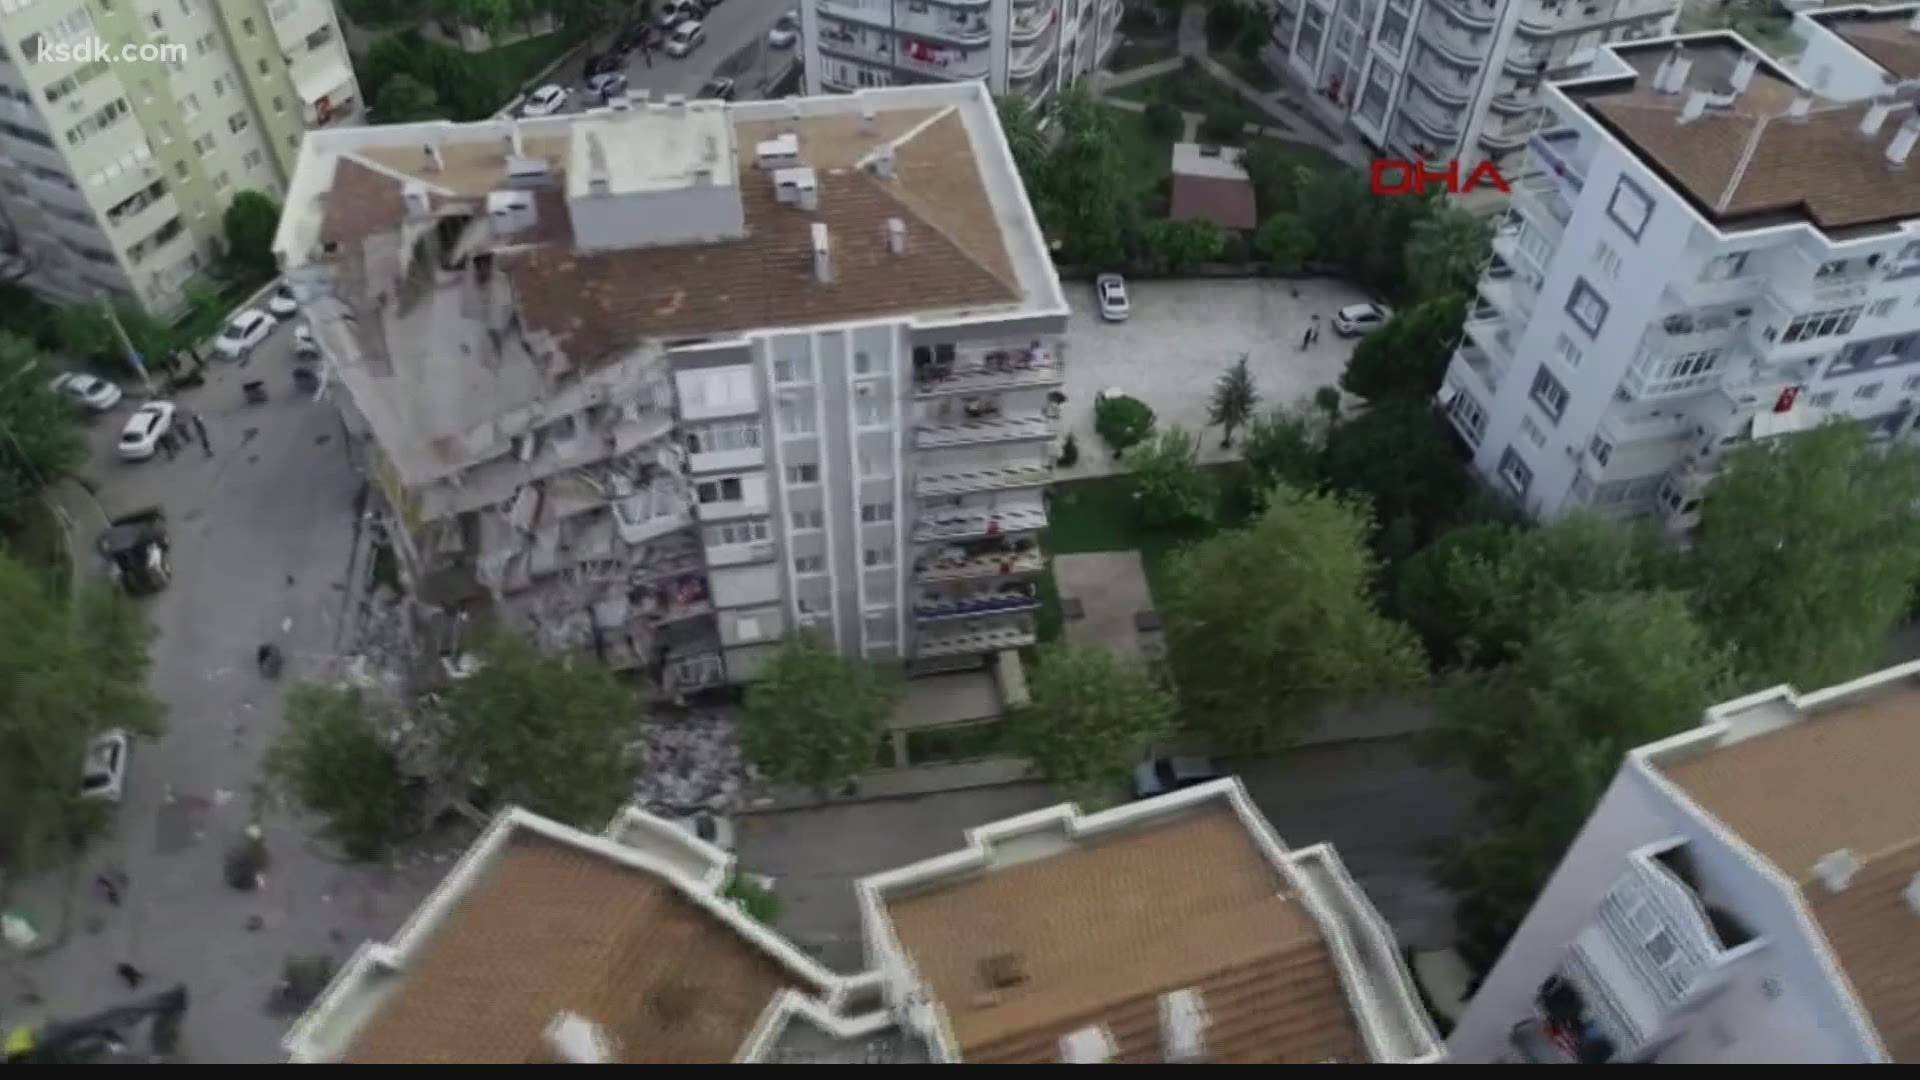 A magnitude 6.6 earthquake has struck Turkey, causing buildings to collapse